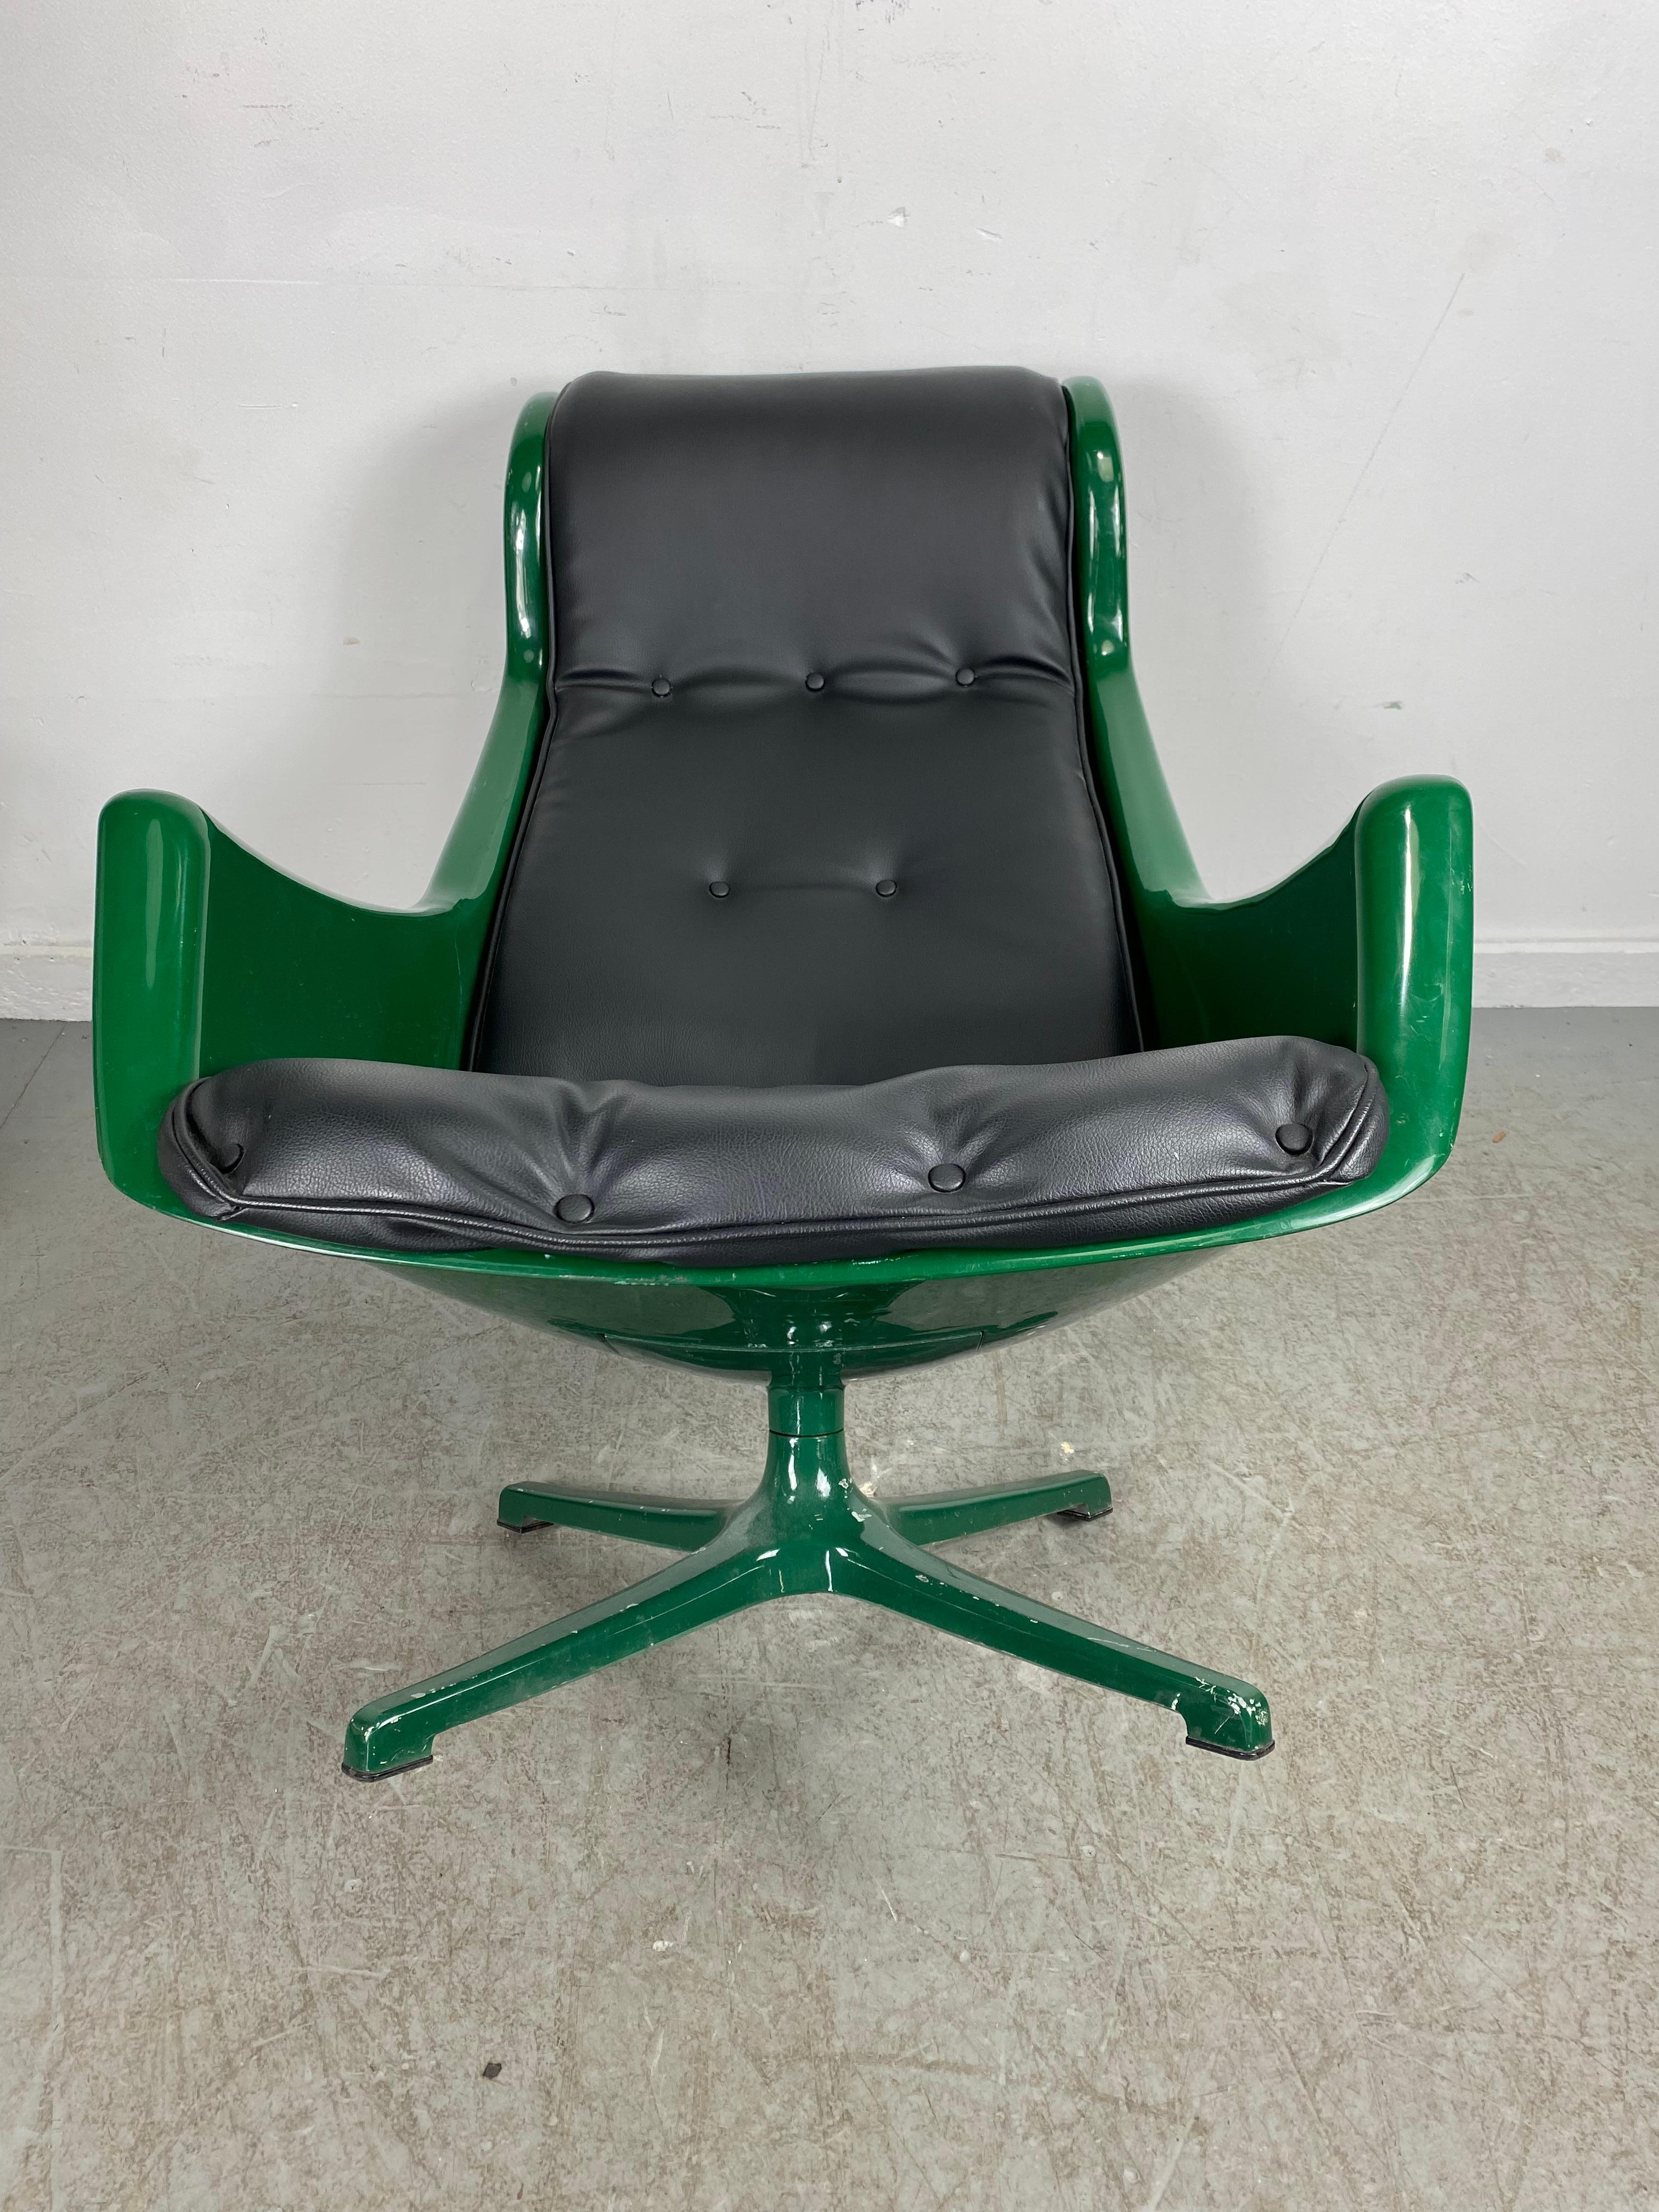 Produced in the period from 1970-1979 by Alf Svensson and Yngve Sandström for DUX of Sweden. Very rare green example, extremely comfortable. Amazing design, superior quality. Hand delivery avail to New York City or anywhere en route from Buffalo